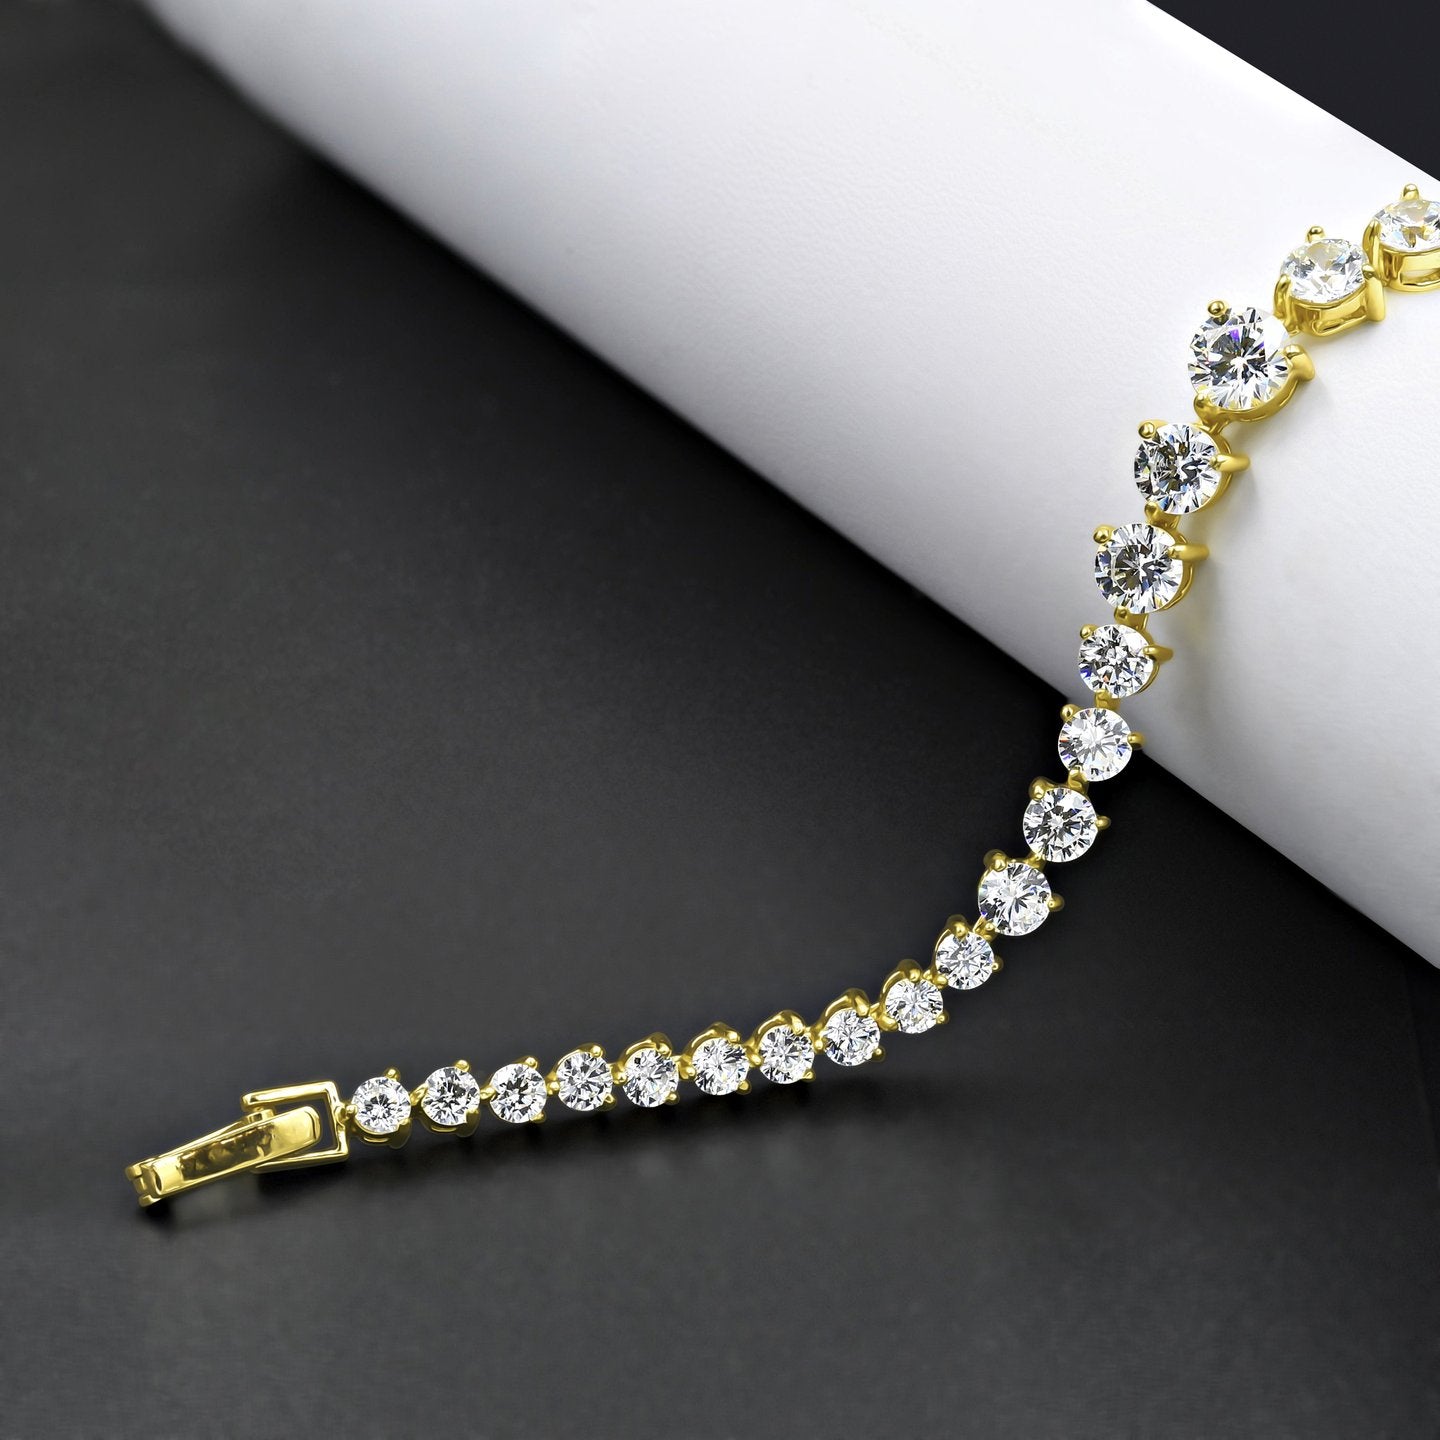 Luculentus 925 Silver 14K Yellow Gold Plated Chain With Cz Stones